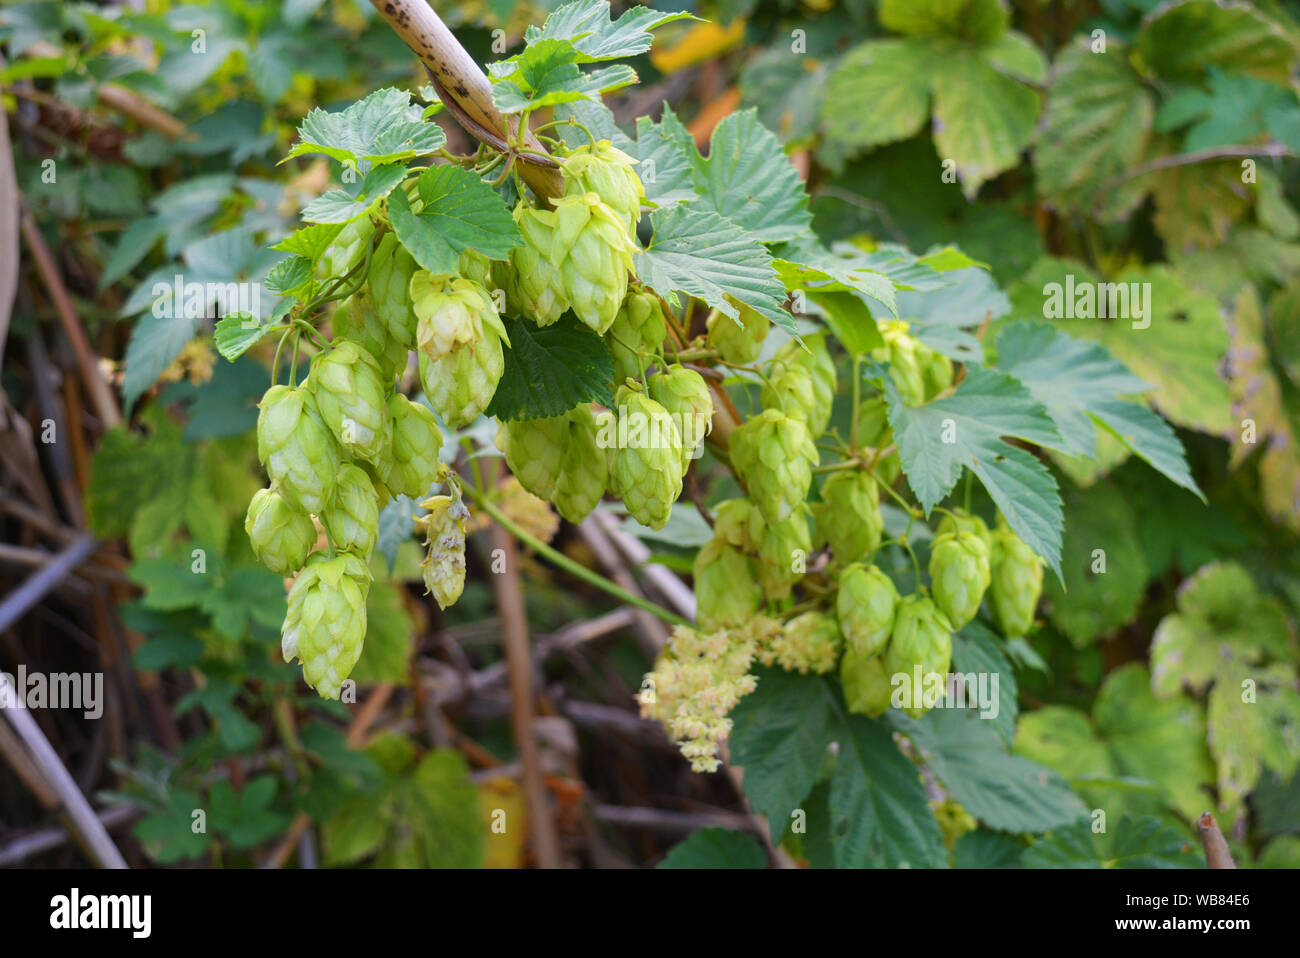 Beautiful and vibrant green hop leaves with ripe flowers and a vine, humulus flowering plants, family Cannabaceae. Stock Photo